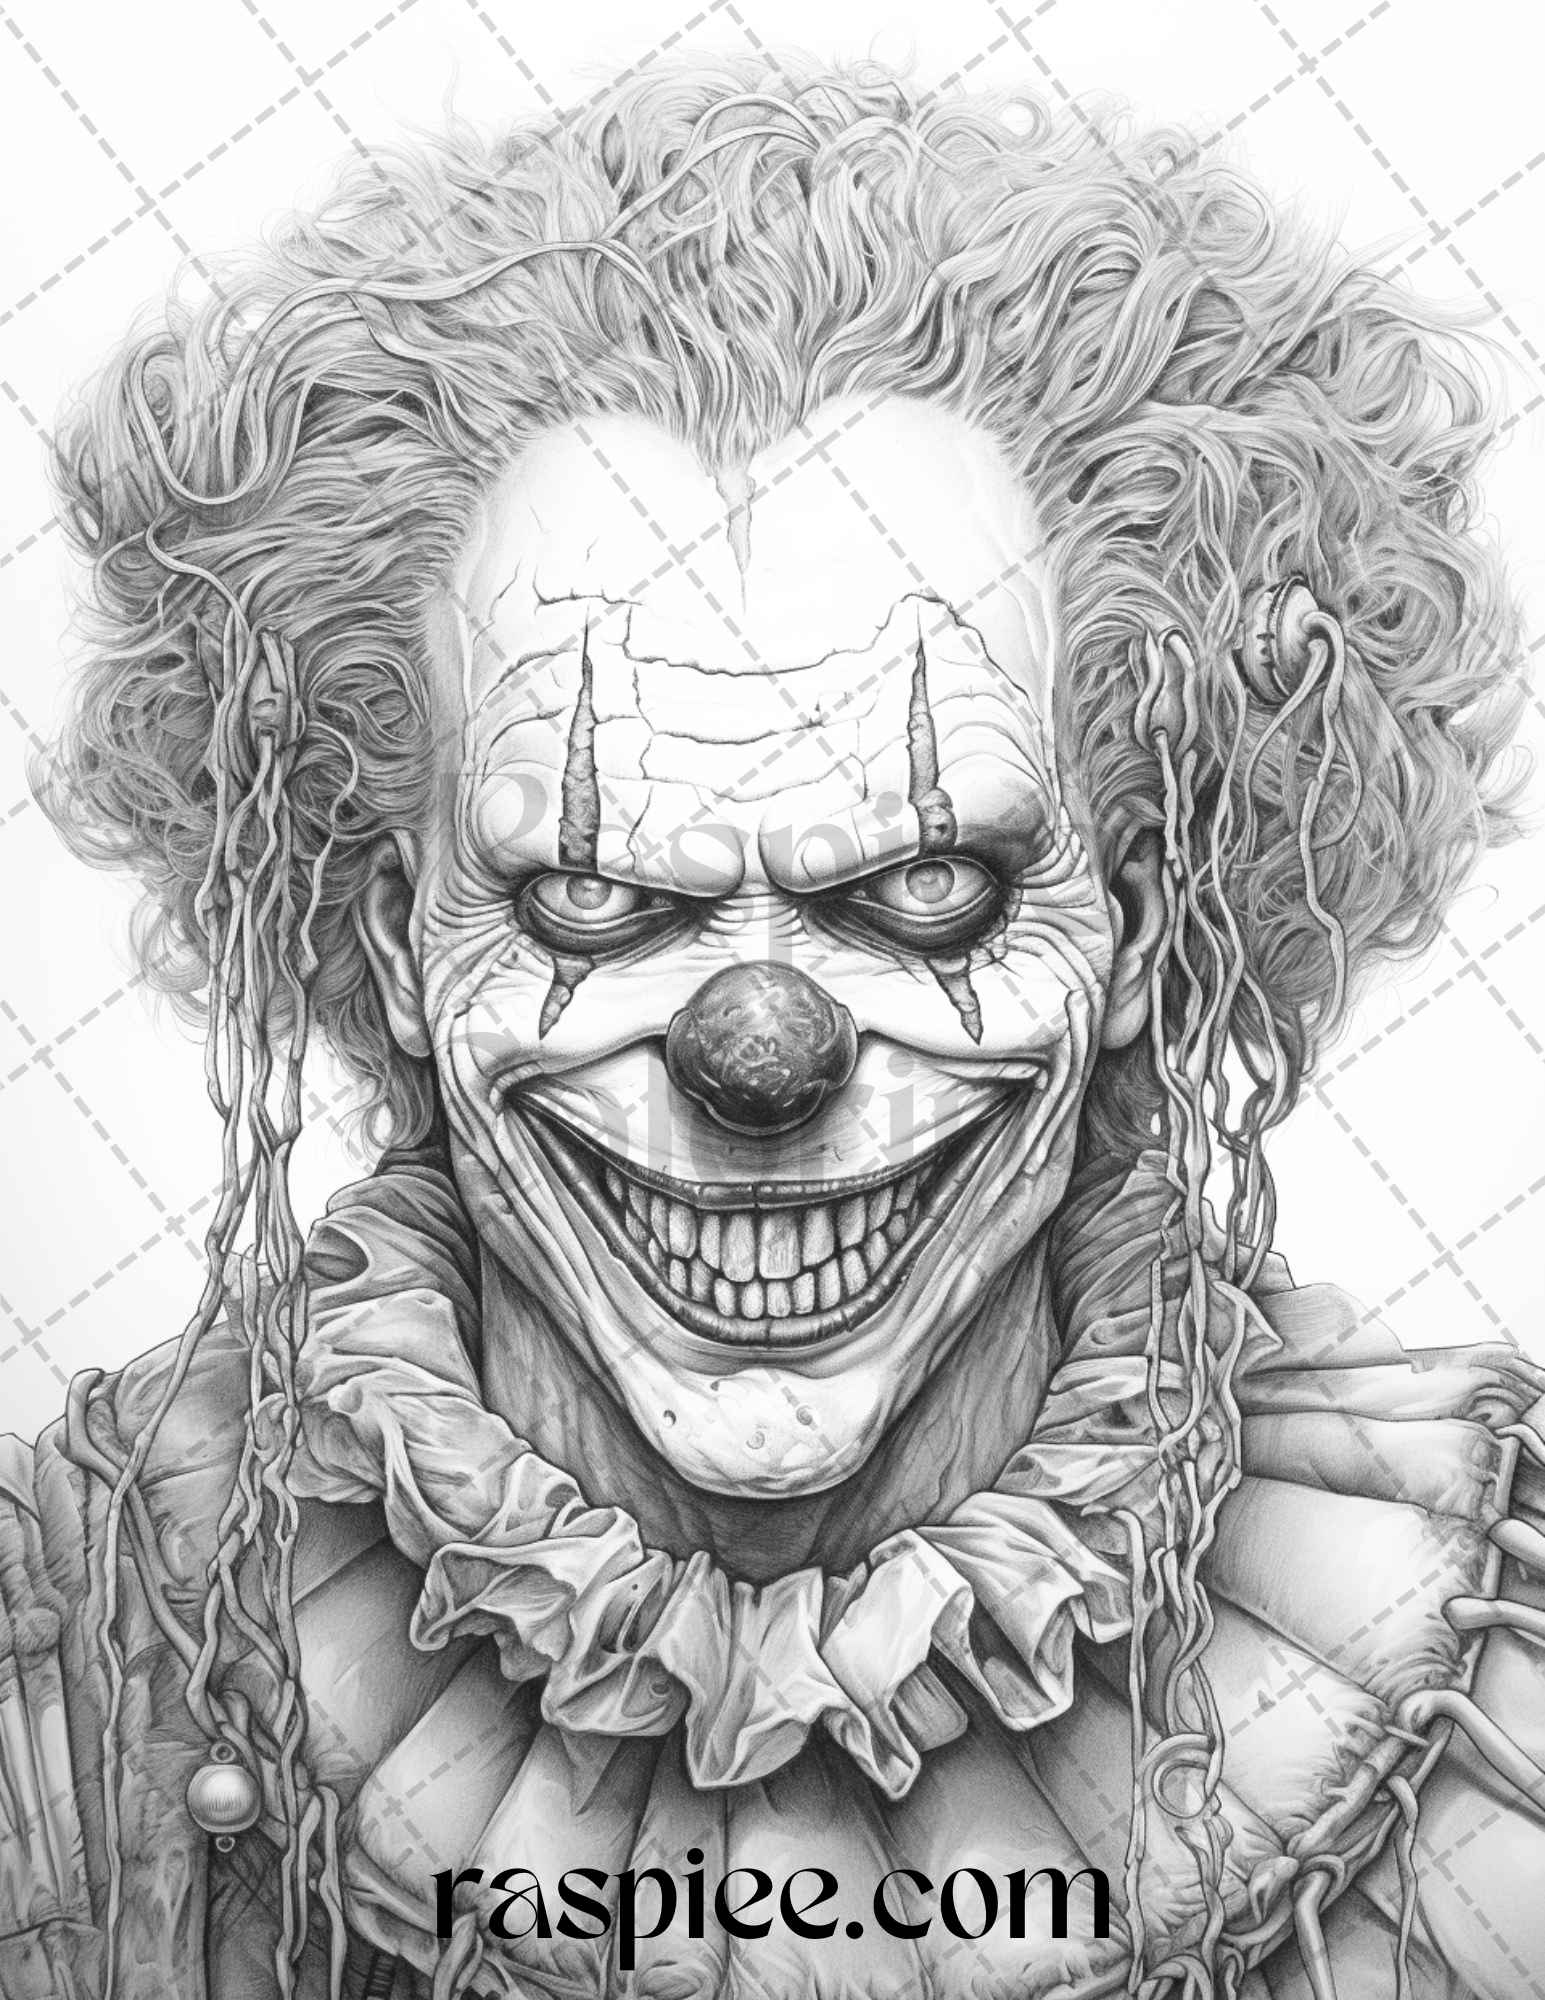 Spooky Clowns Grayscale Coloring Pages Printable for Adults, Halloween-themed adult coloring book, Creepy clown illustrations for grayscale coloring, Haunting black and white coloring pages, Horror-themed printable coloring sheets, Scary clowns coloring for adults, Spooky circus art grayscale printables